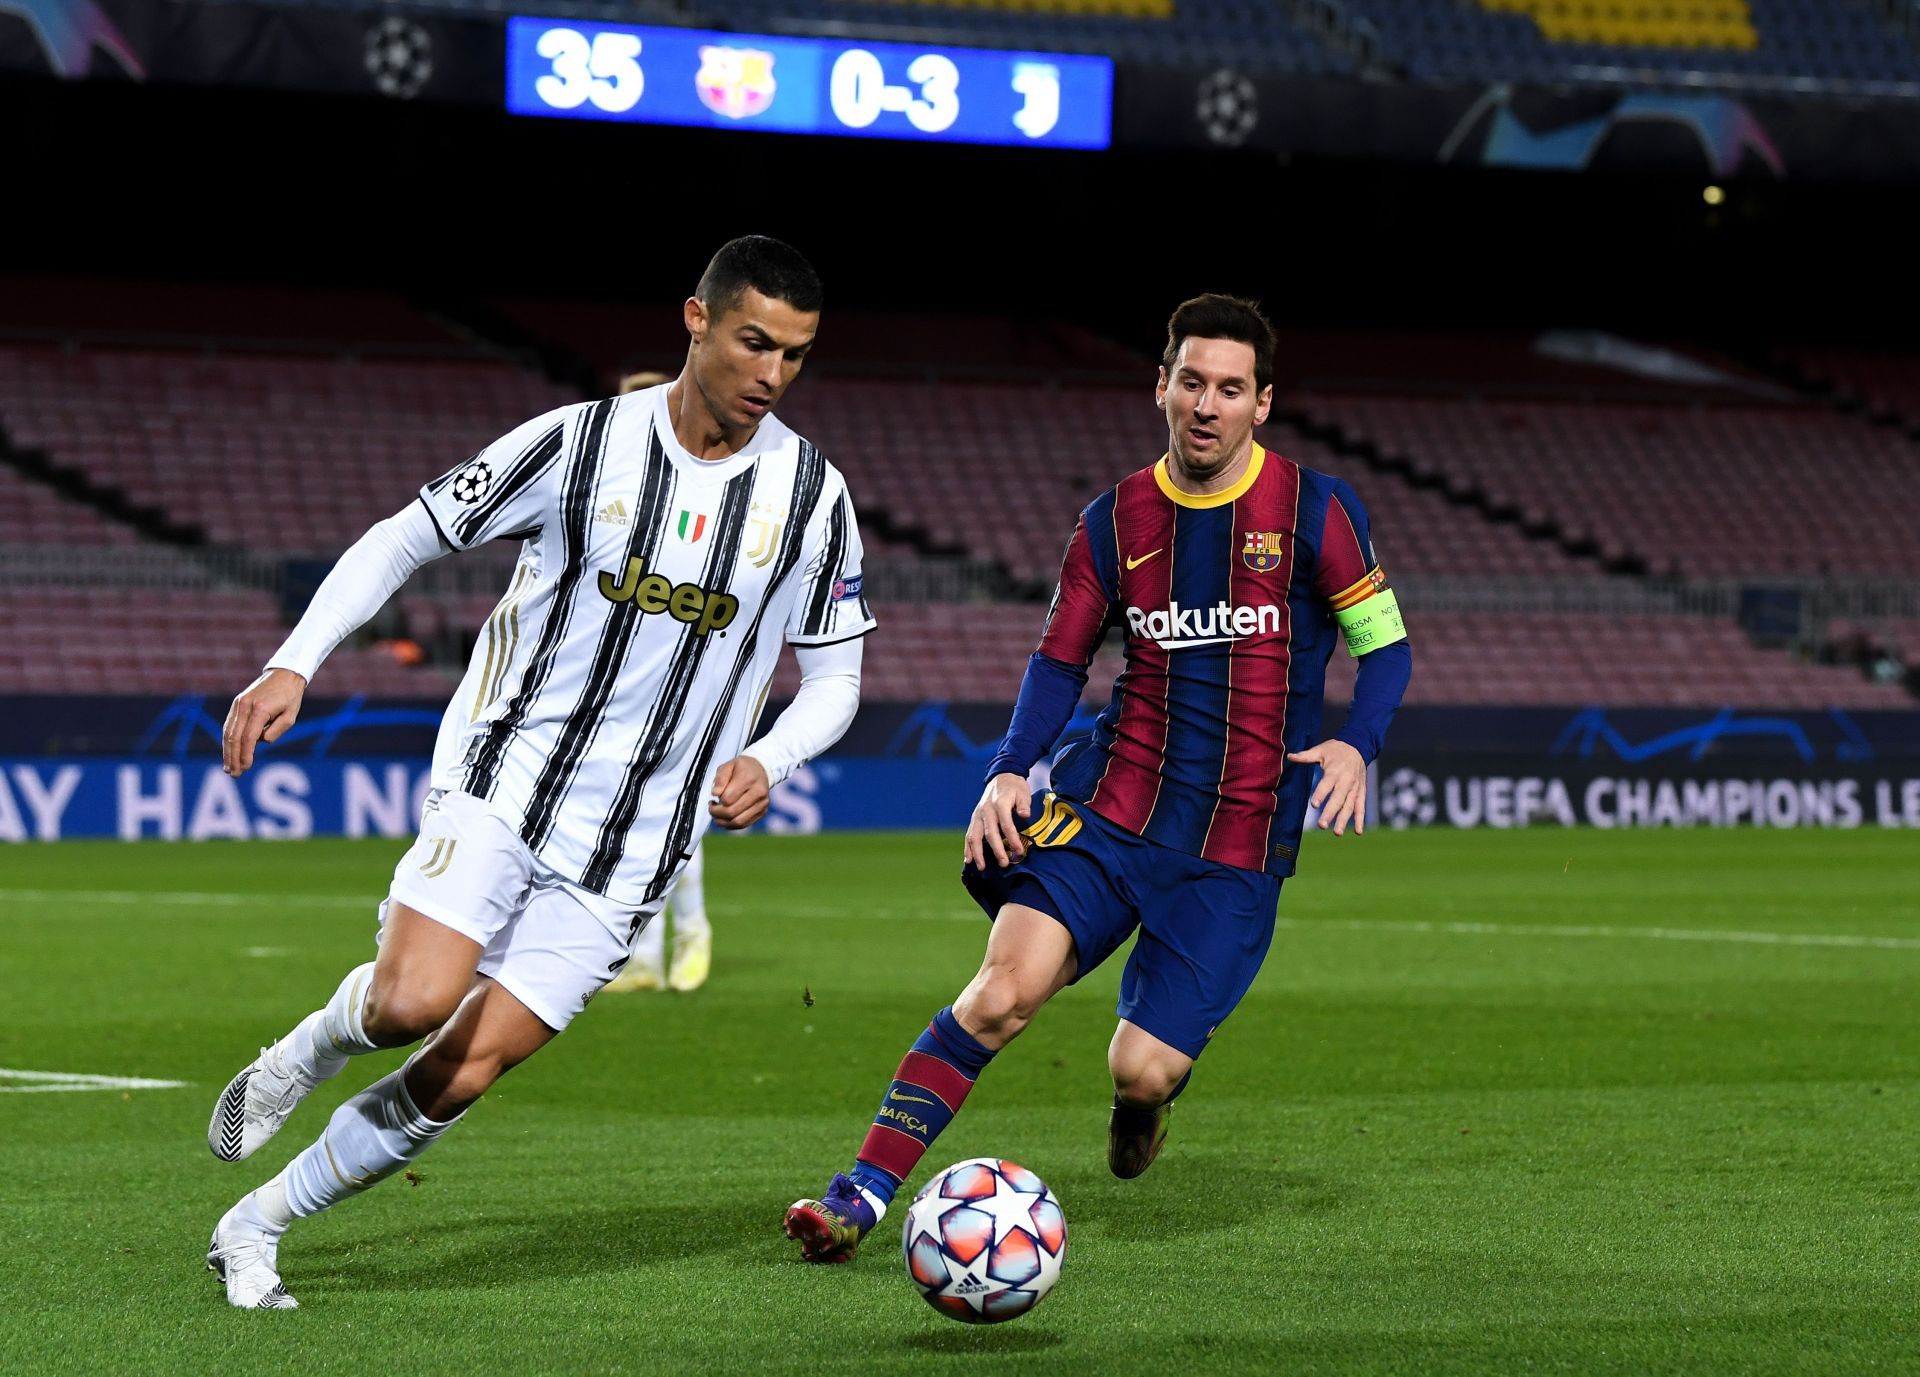 Cristiano Ronaldo and Lionel Messi are two of the top-scoring players in the Champions League